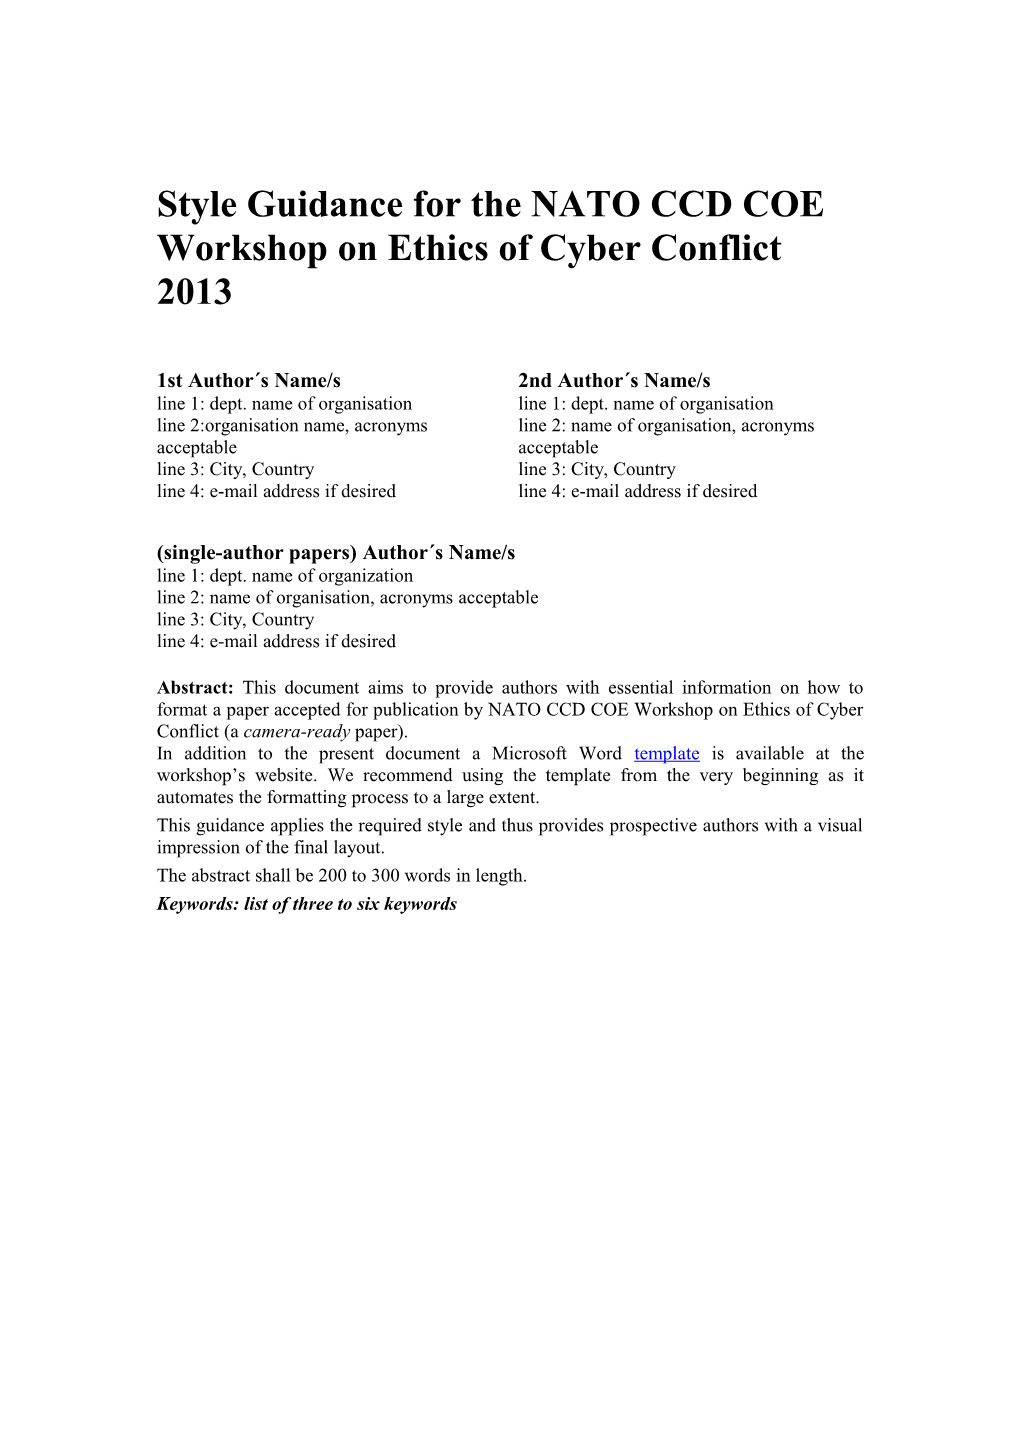 Style Guidance for the NATO CCD COE Workshop on Ethics of Cyber Conflict 2013